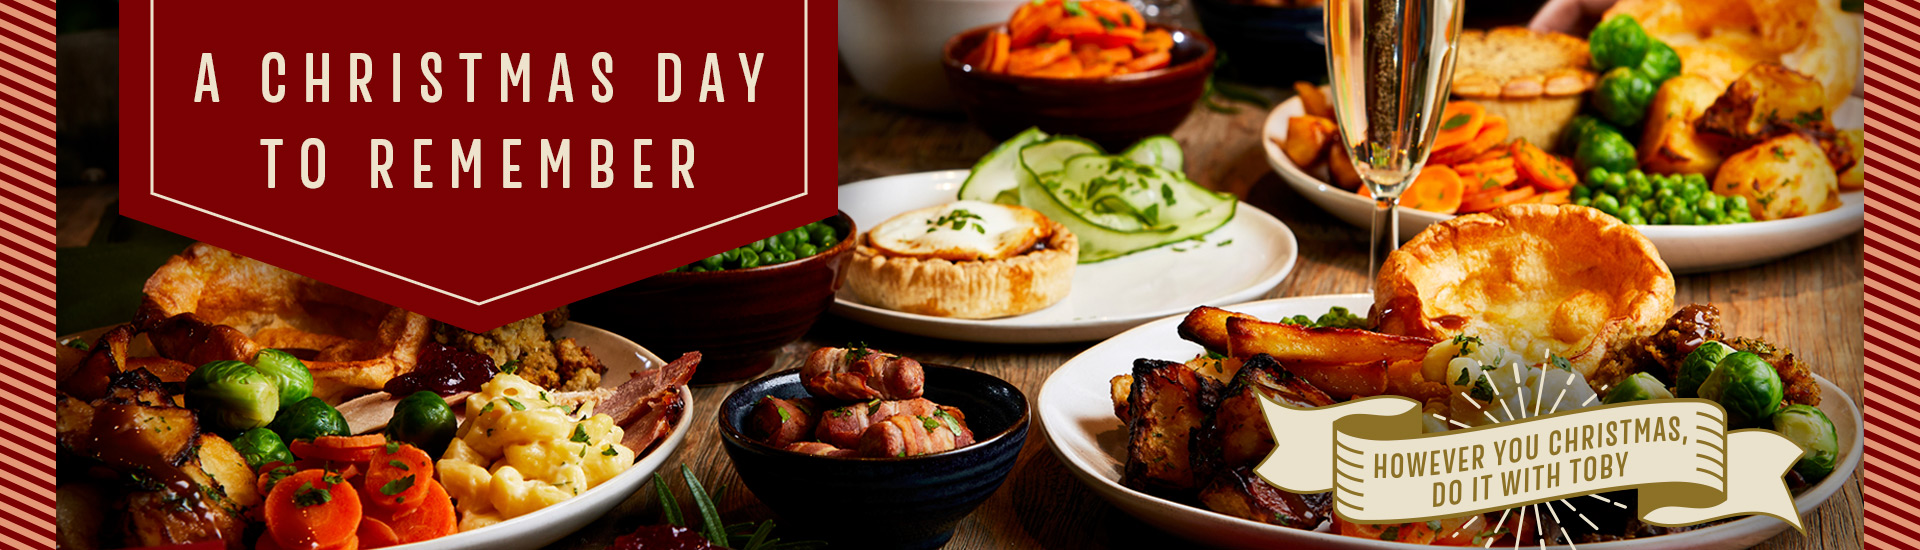 Christmas Day menu at Toby Carvery Chapel Allerton